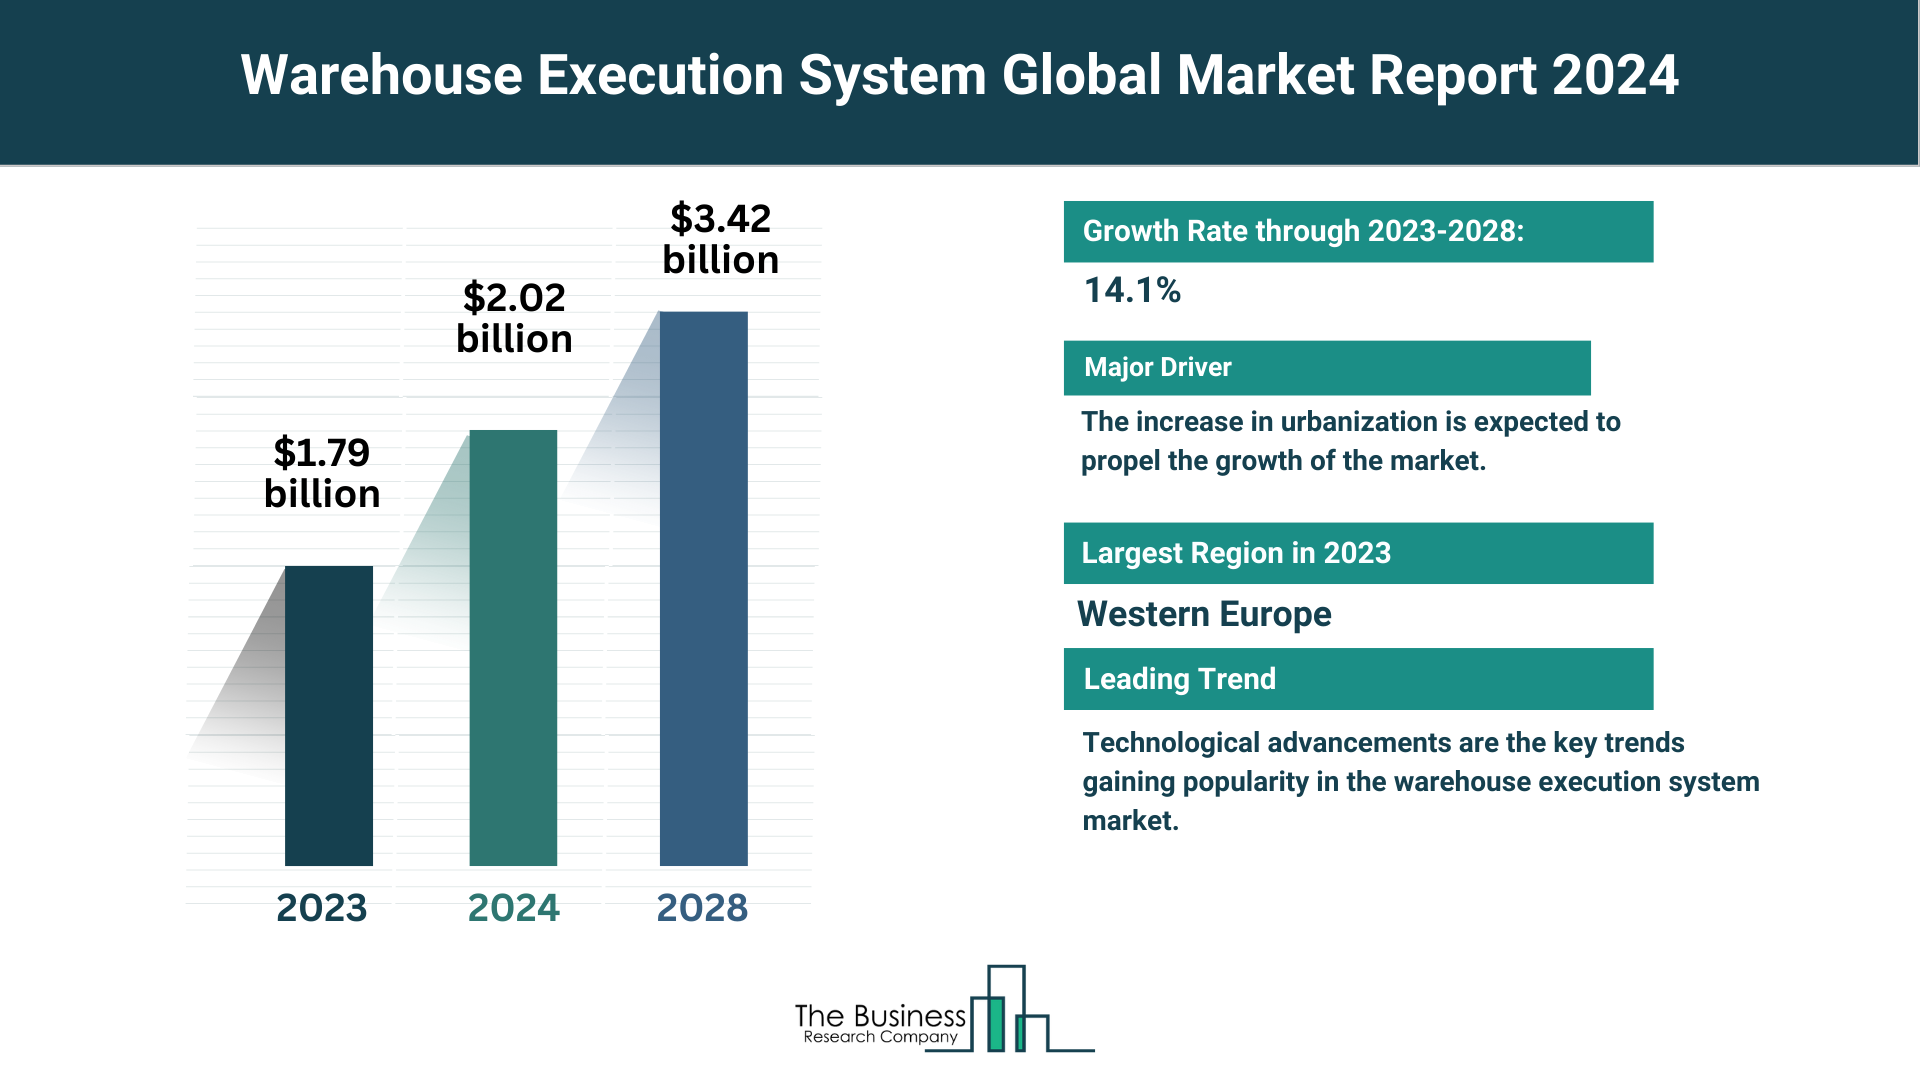 Global Warehouse Execution System Market Overview 2024: Size, Drivers, And Trends